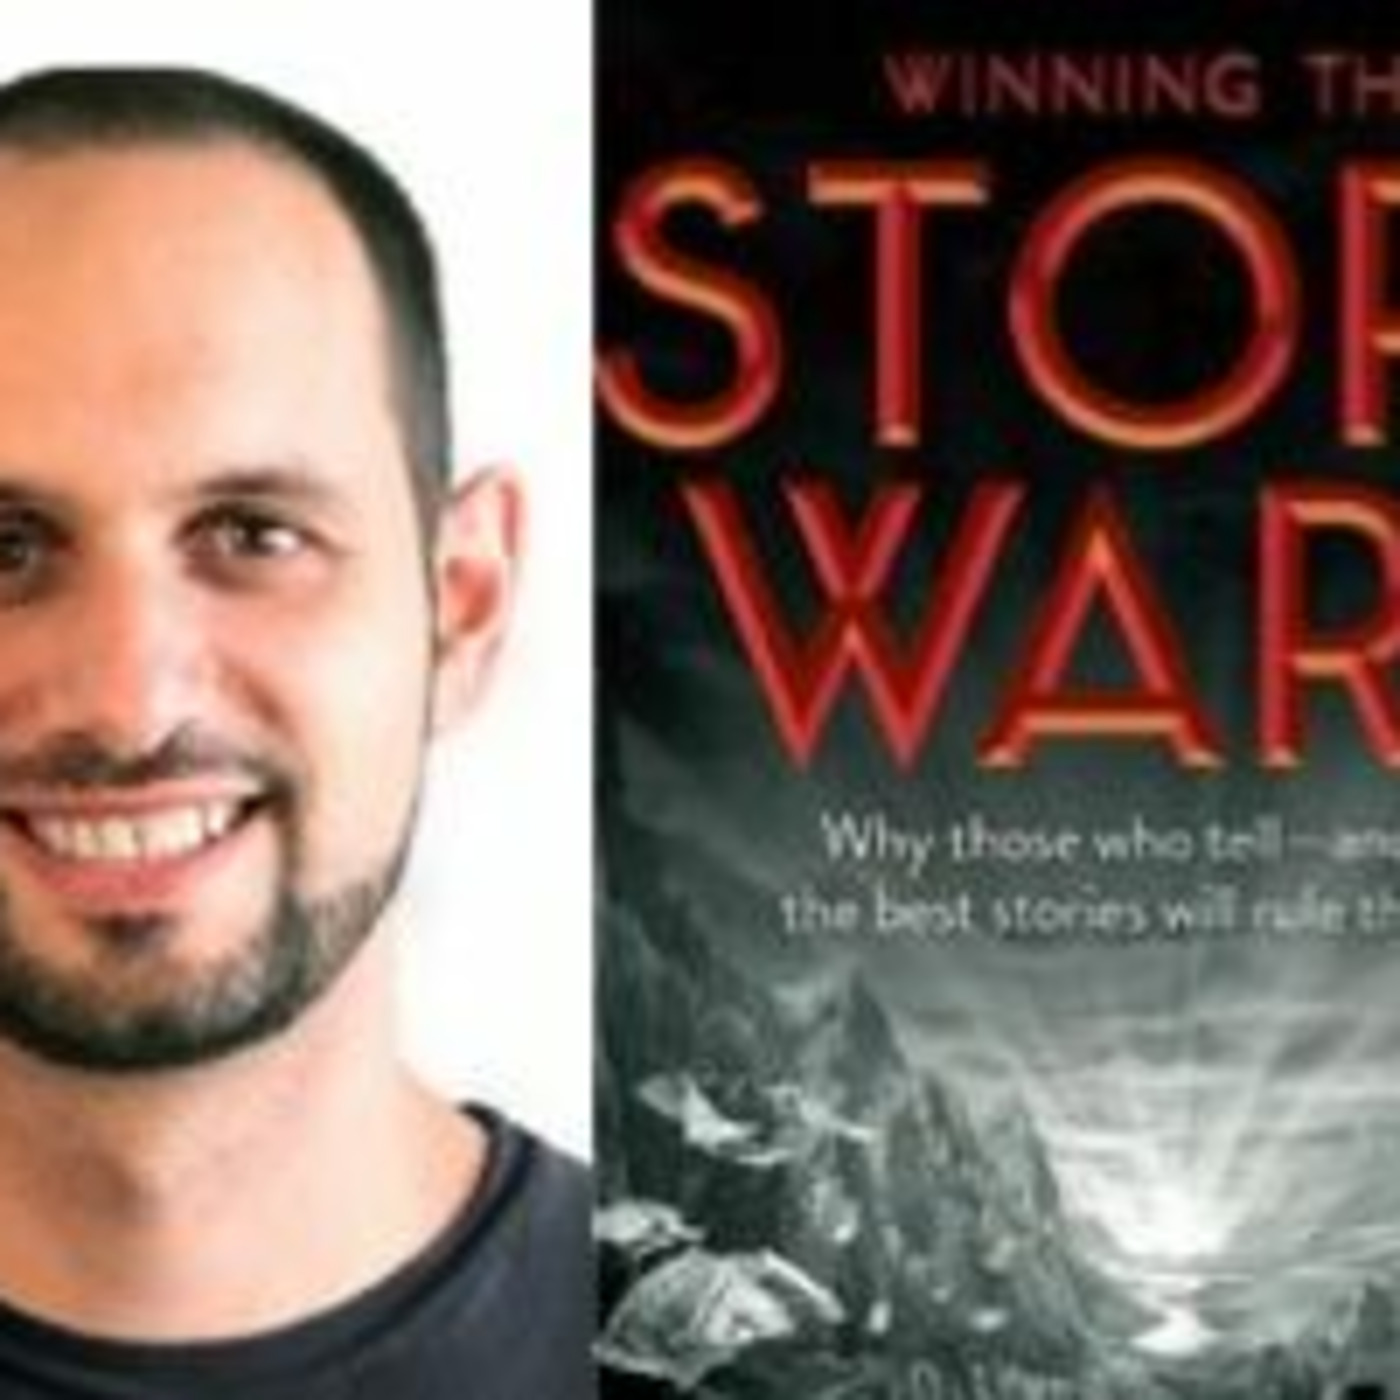 Q&A: JONAH SACH, author - WINNING THE STORY WARS: Why Those Who Tell and Live the Best Stories Will Rule the Future